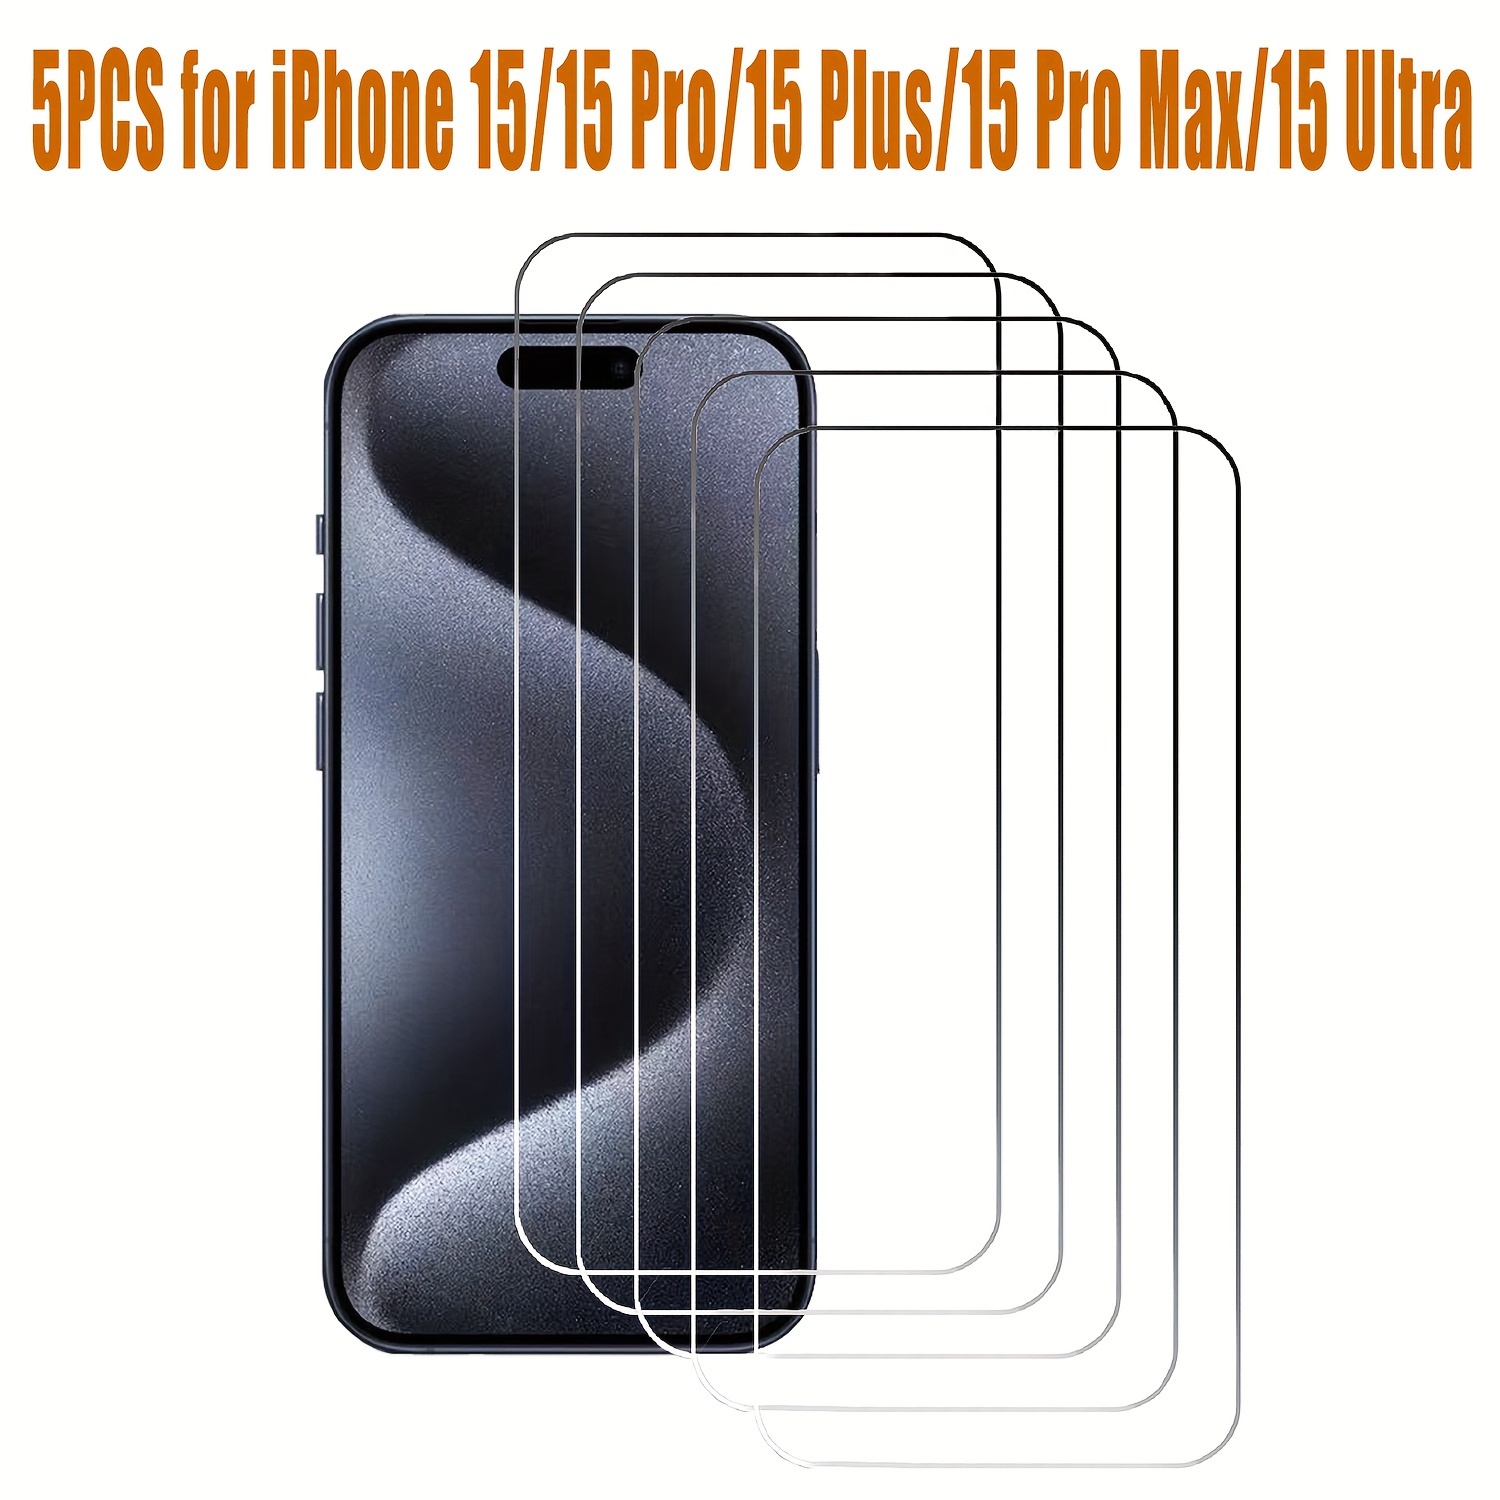 1-5PCS Transparent Tempered Glass For iPhone 15 Pro Max Screen